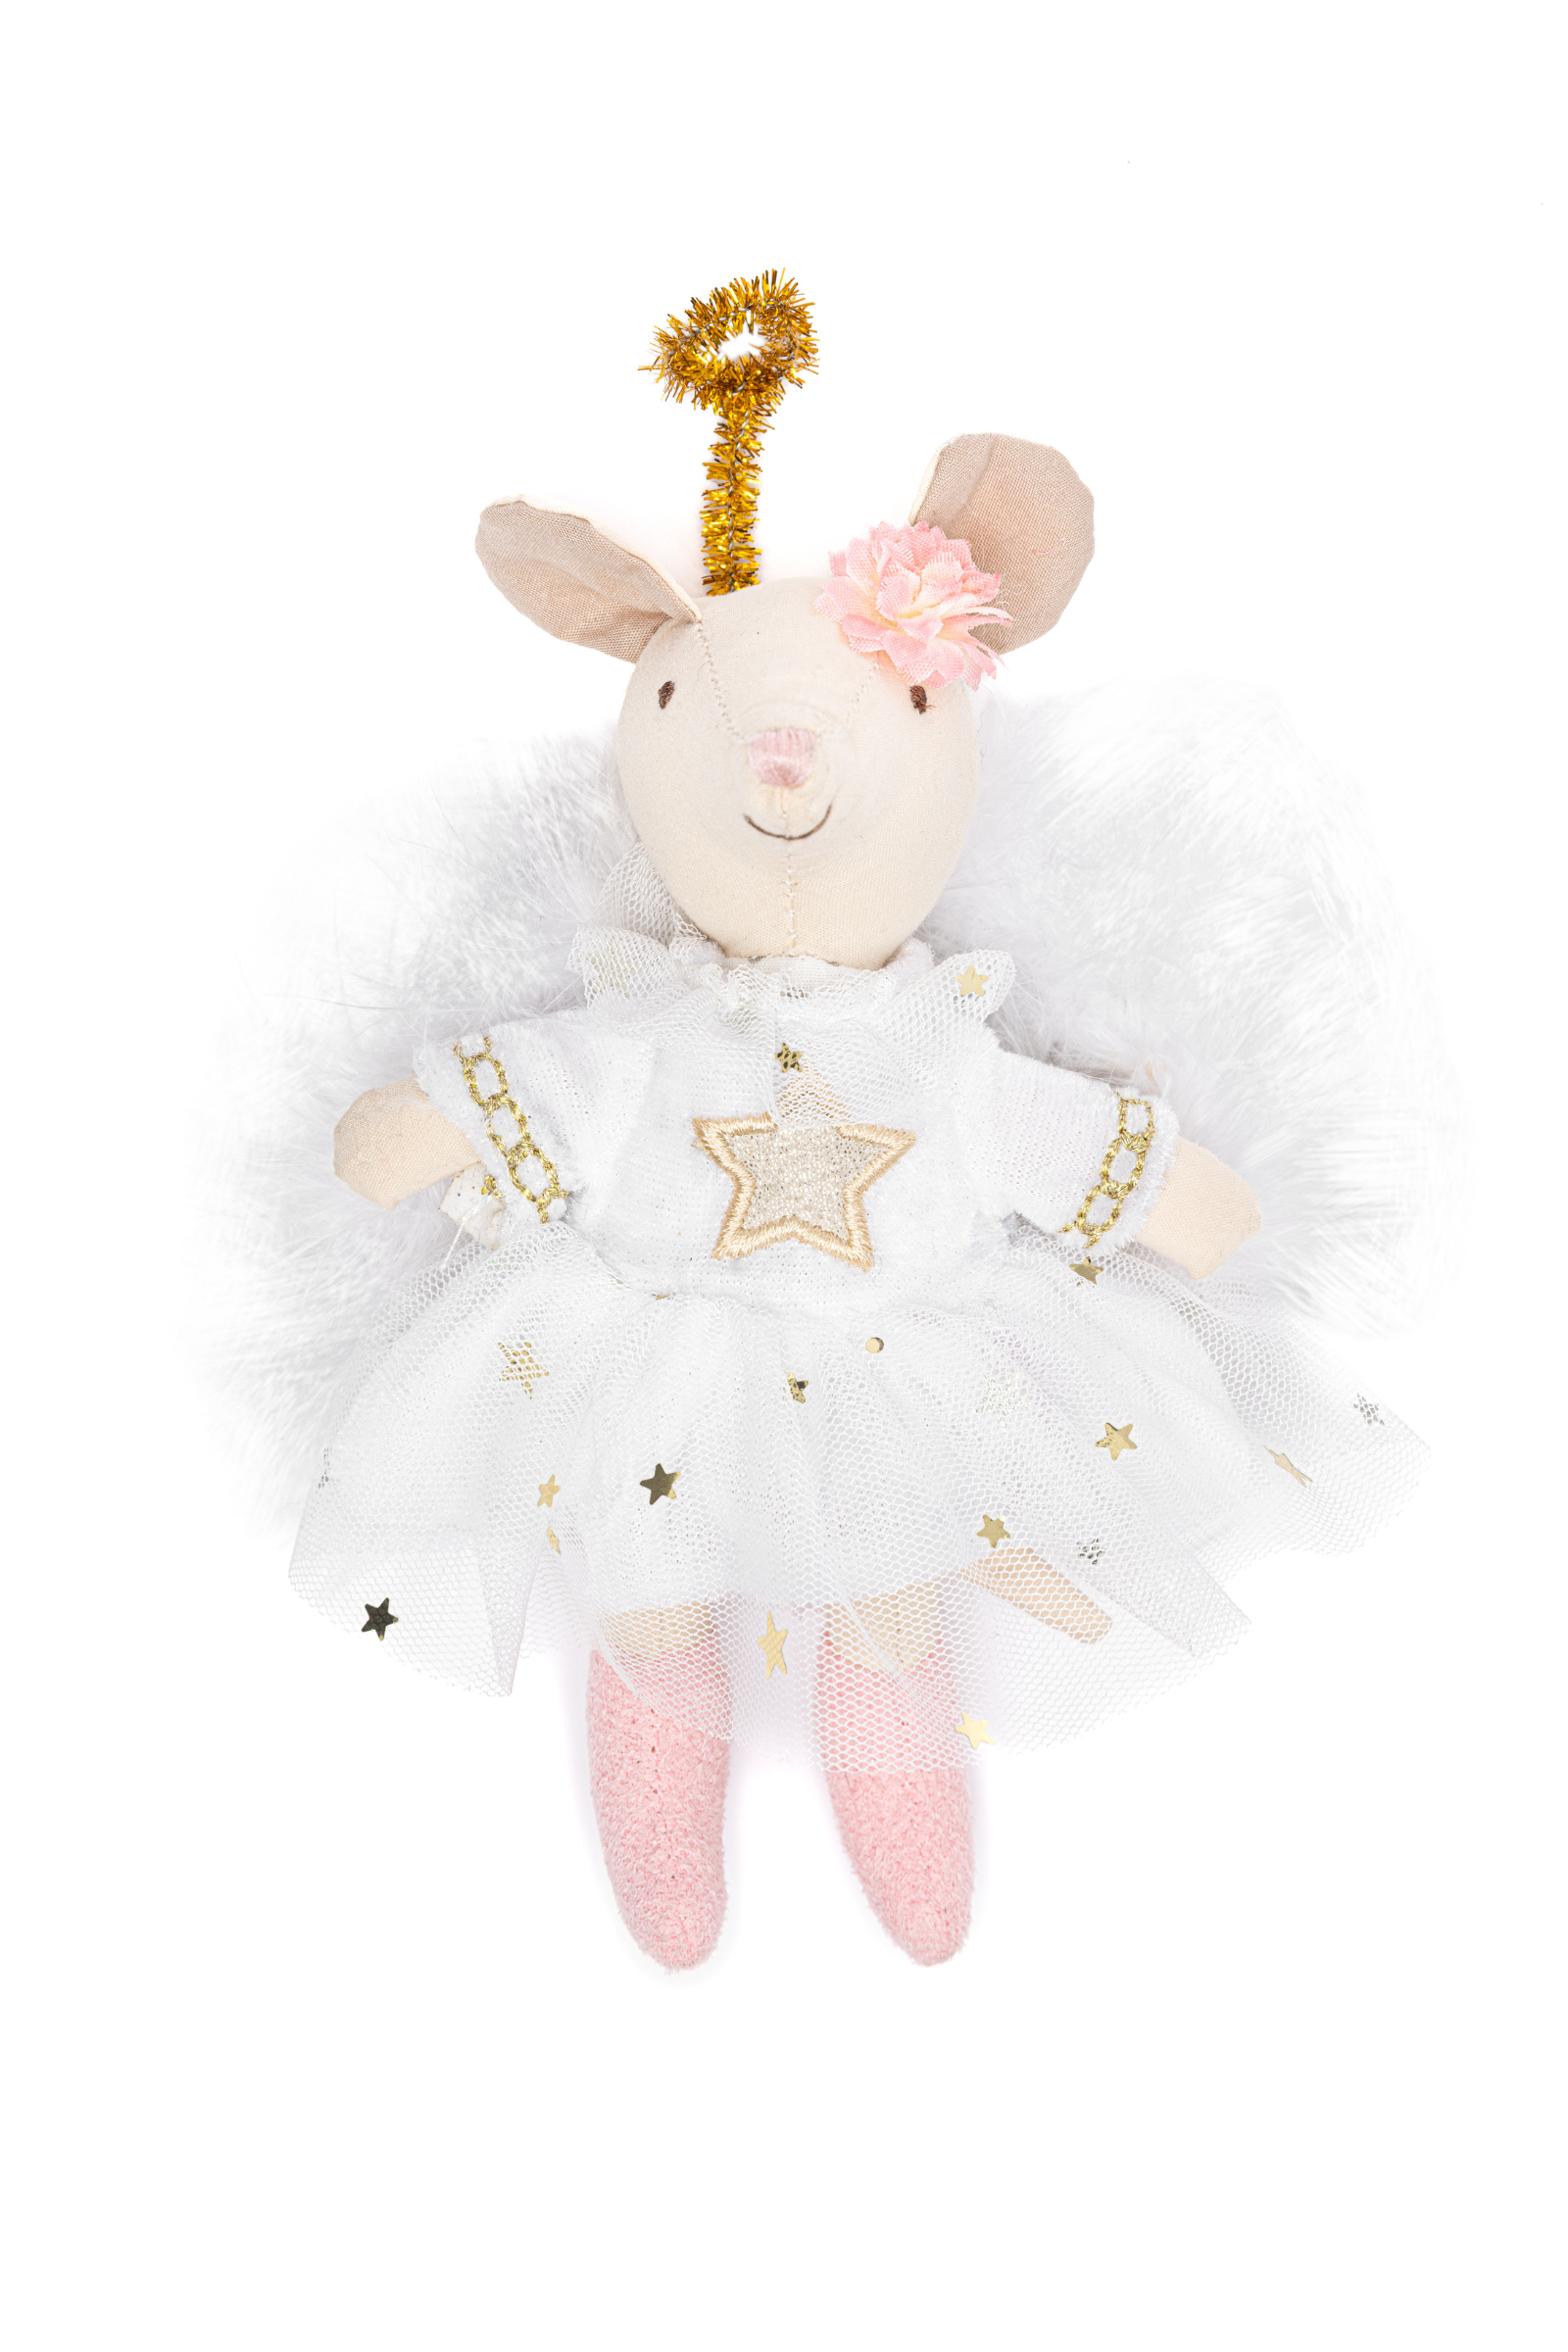 Evangeline The Angel Mouse, 7"